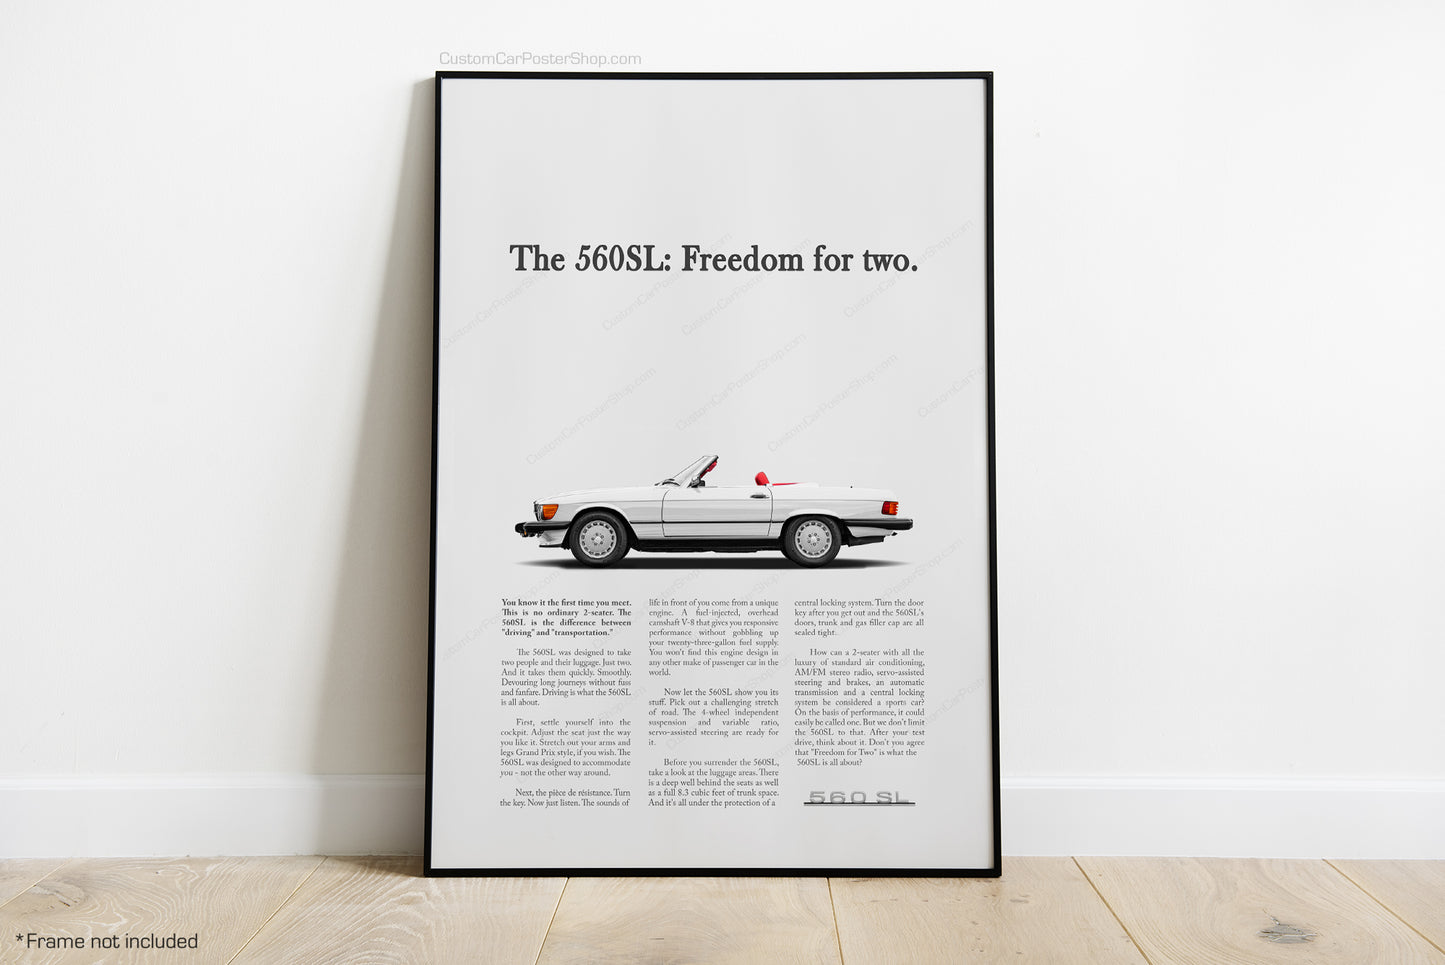 Mercedes-Benz 560SL Vintage Print Ad - Freedom for Two